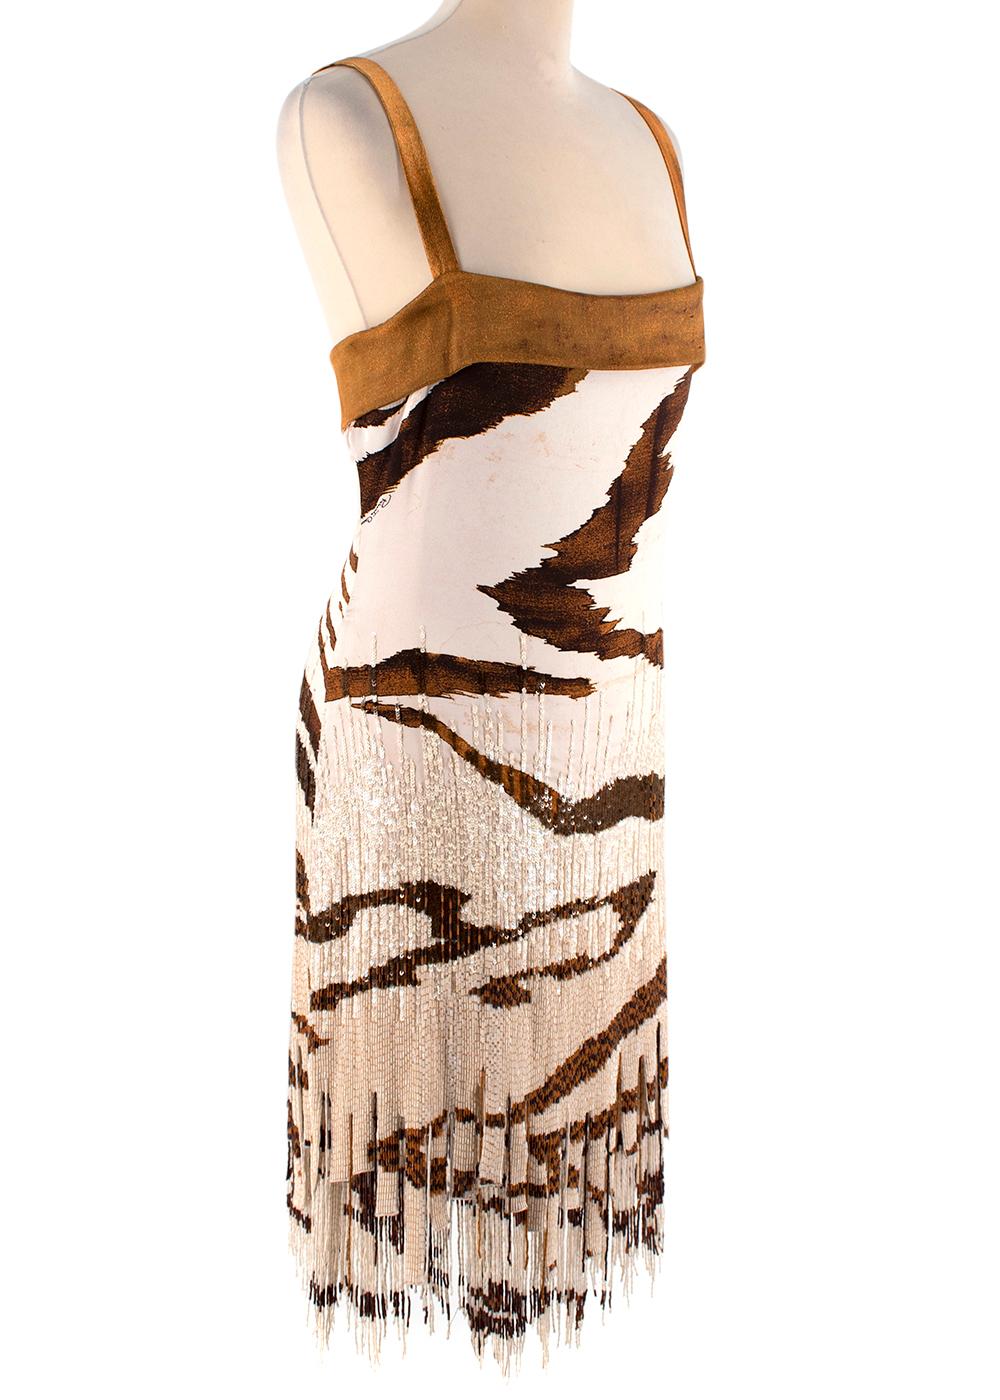 Roberto Cavalli Tiger Print Beaded Sequin Silk Dress

- Print imitating a tiger print
- Heavily embellished with beaded sequins
- Fully lined
- Concealed zip closure at the back
- Mix of beige, brown and nude tones

Materials:
93% Silk
7%